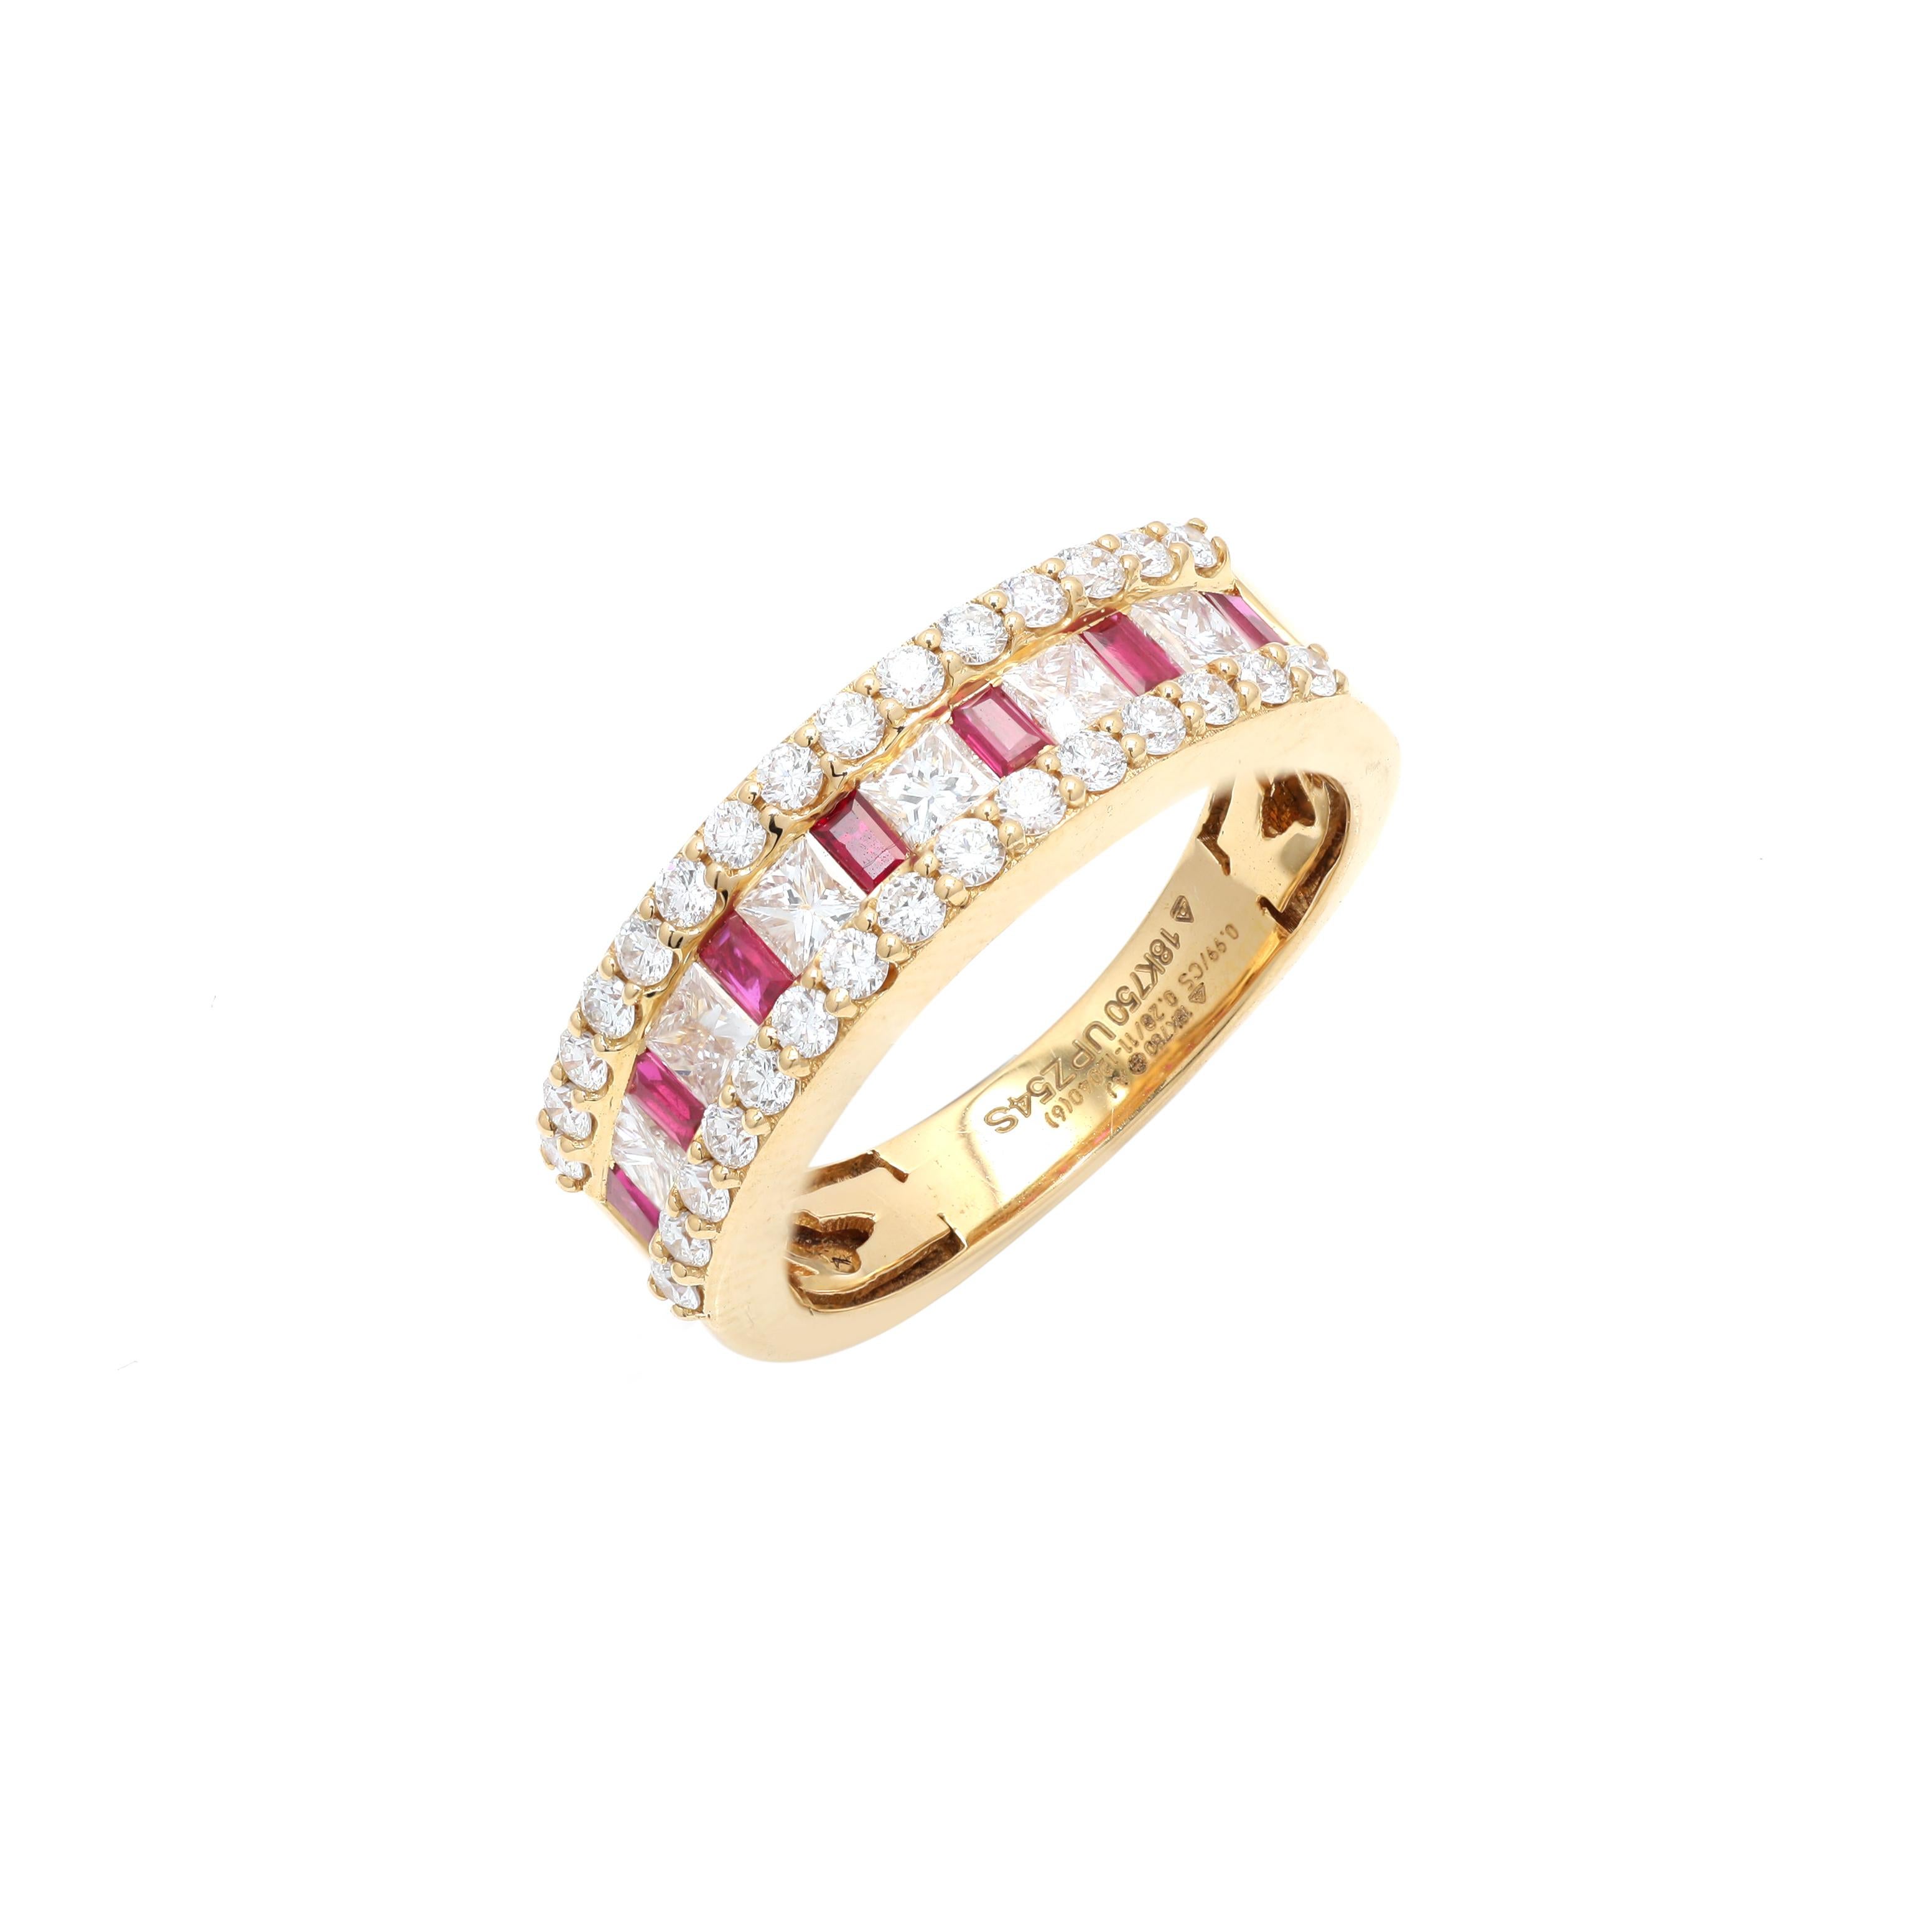 For Sale:  Stackable Half Eternity Ruby Engagement Ring in 18K Yellow Gold with Diamonds 5